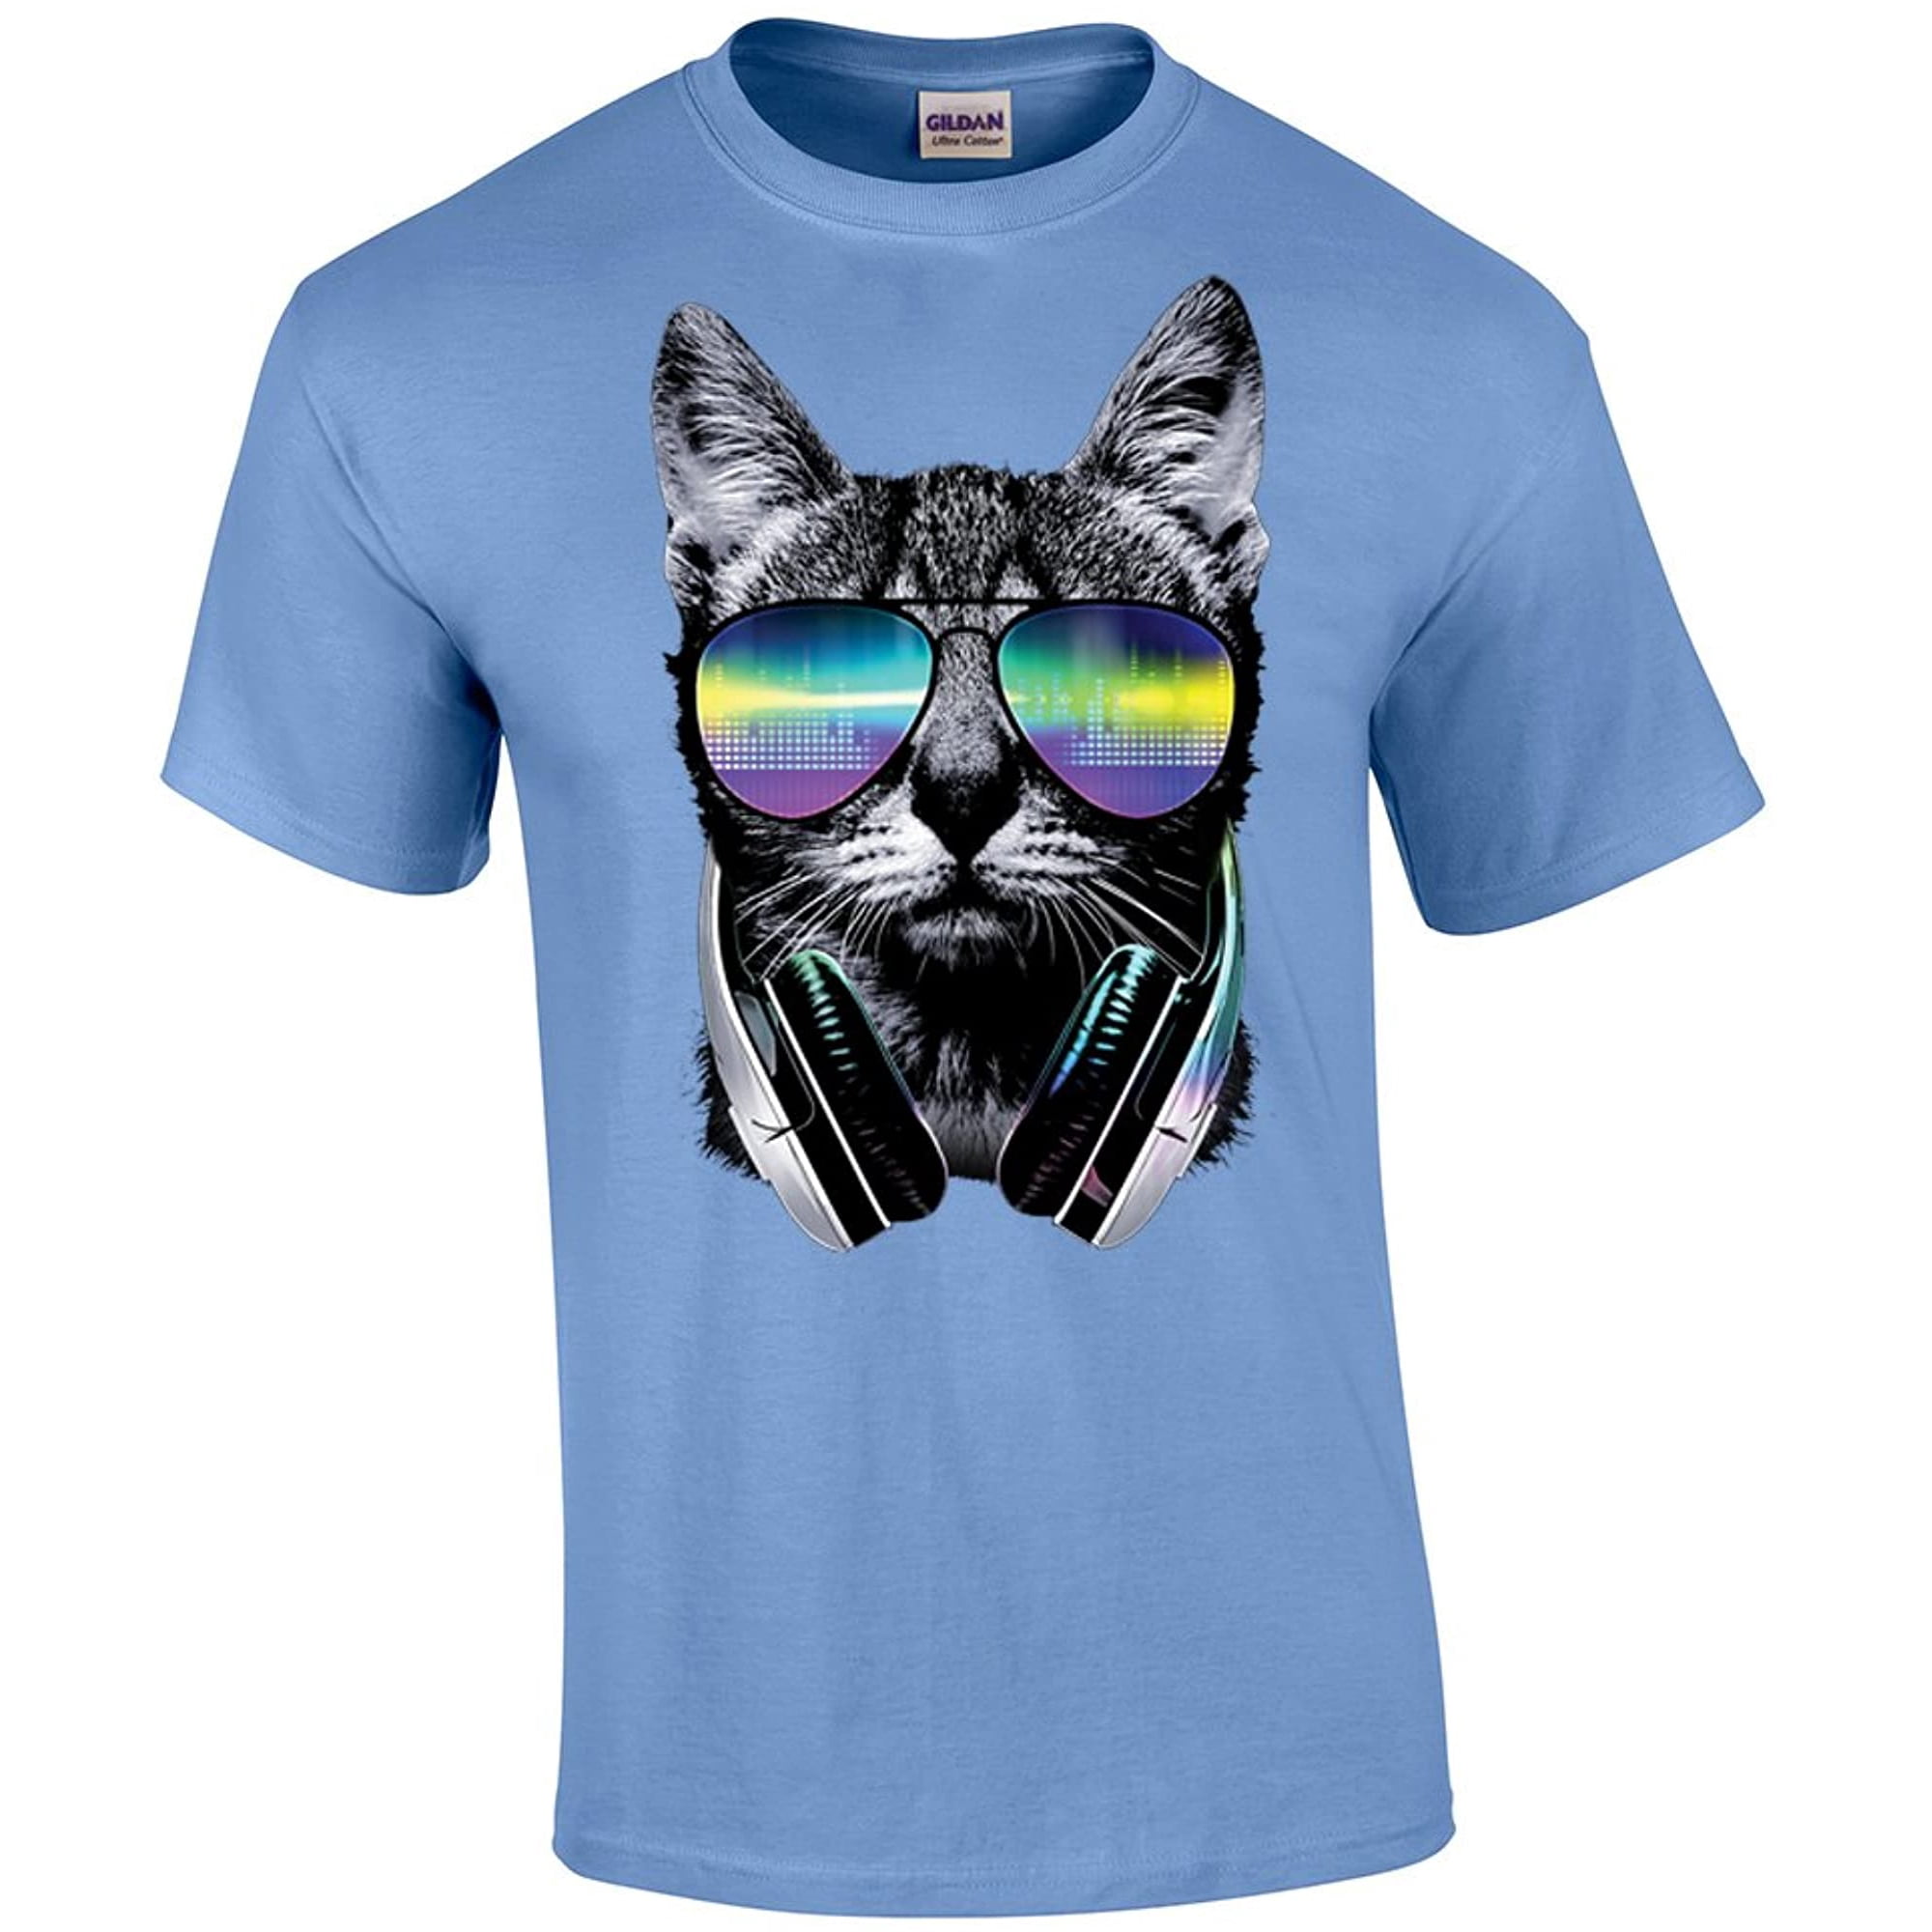 Neon Cat in Glasses with Headphones Funny Adult Tee Shirt Black 